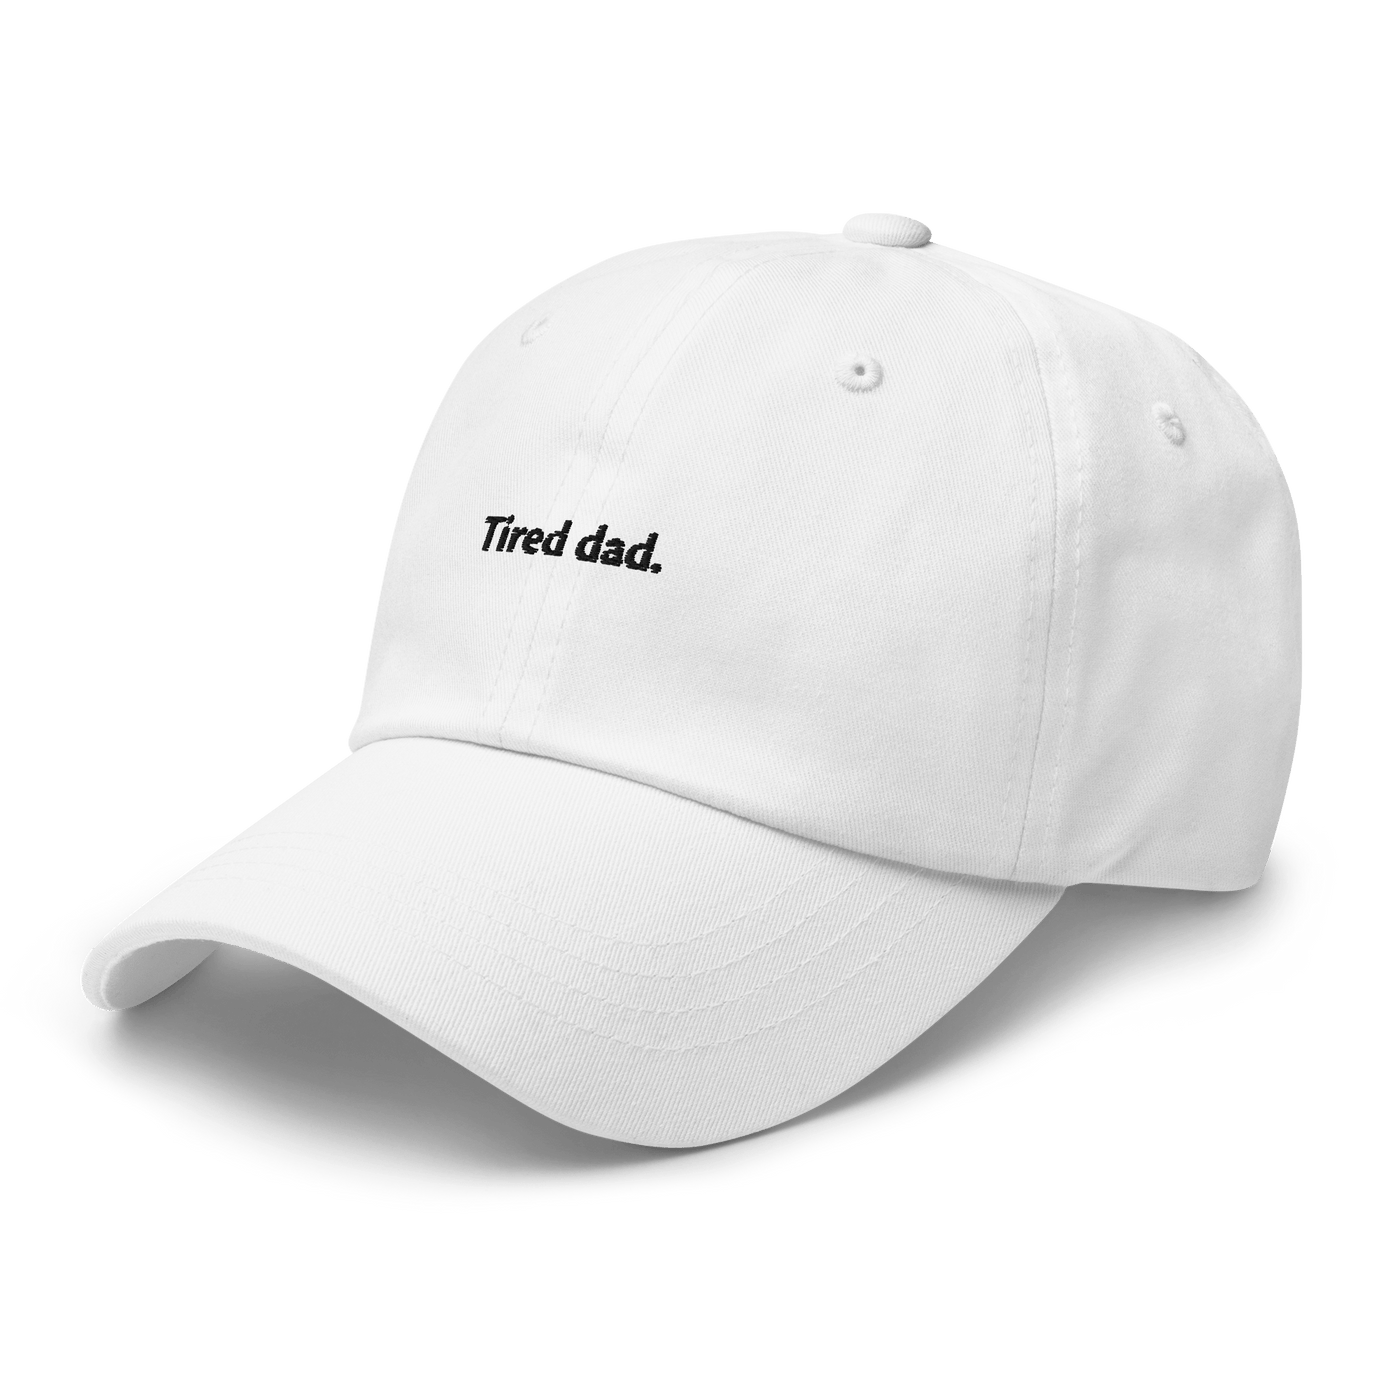 Tired Dad Hat - White - - Just Another Cap Store